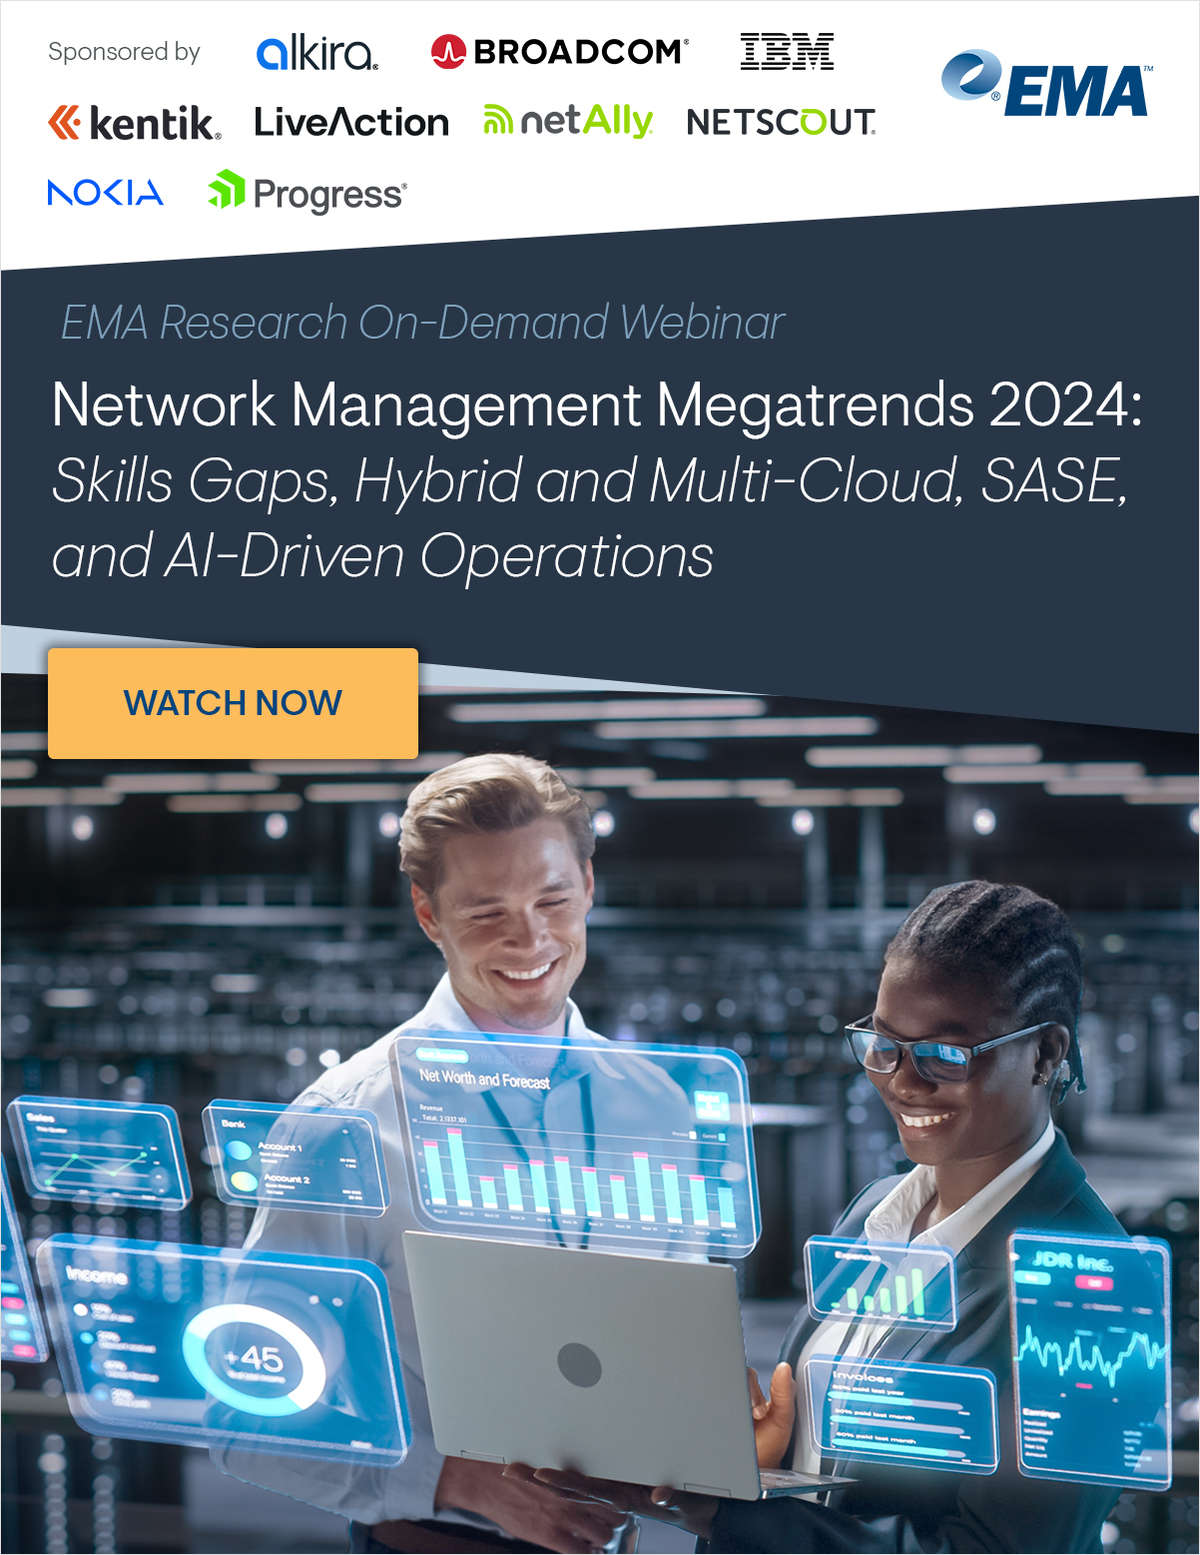 [On-Demand Research Webinar] Network Management Megatrends 2024: Skills Gaps, Hybrid and Multi-Cloud, SASE, and AI-Driven Operations